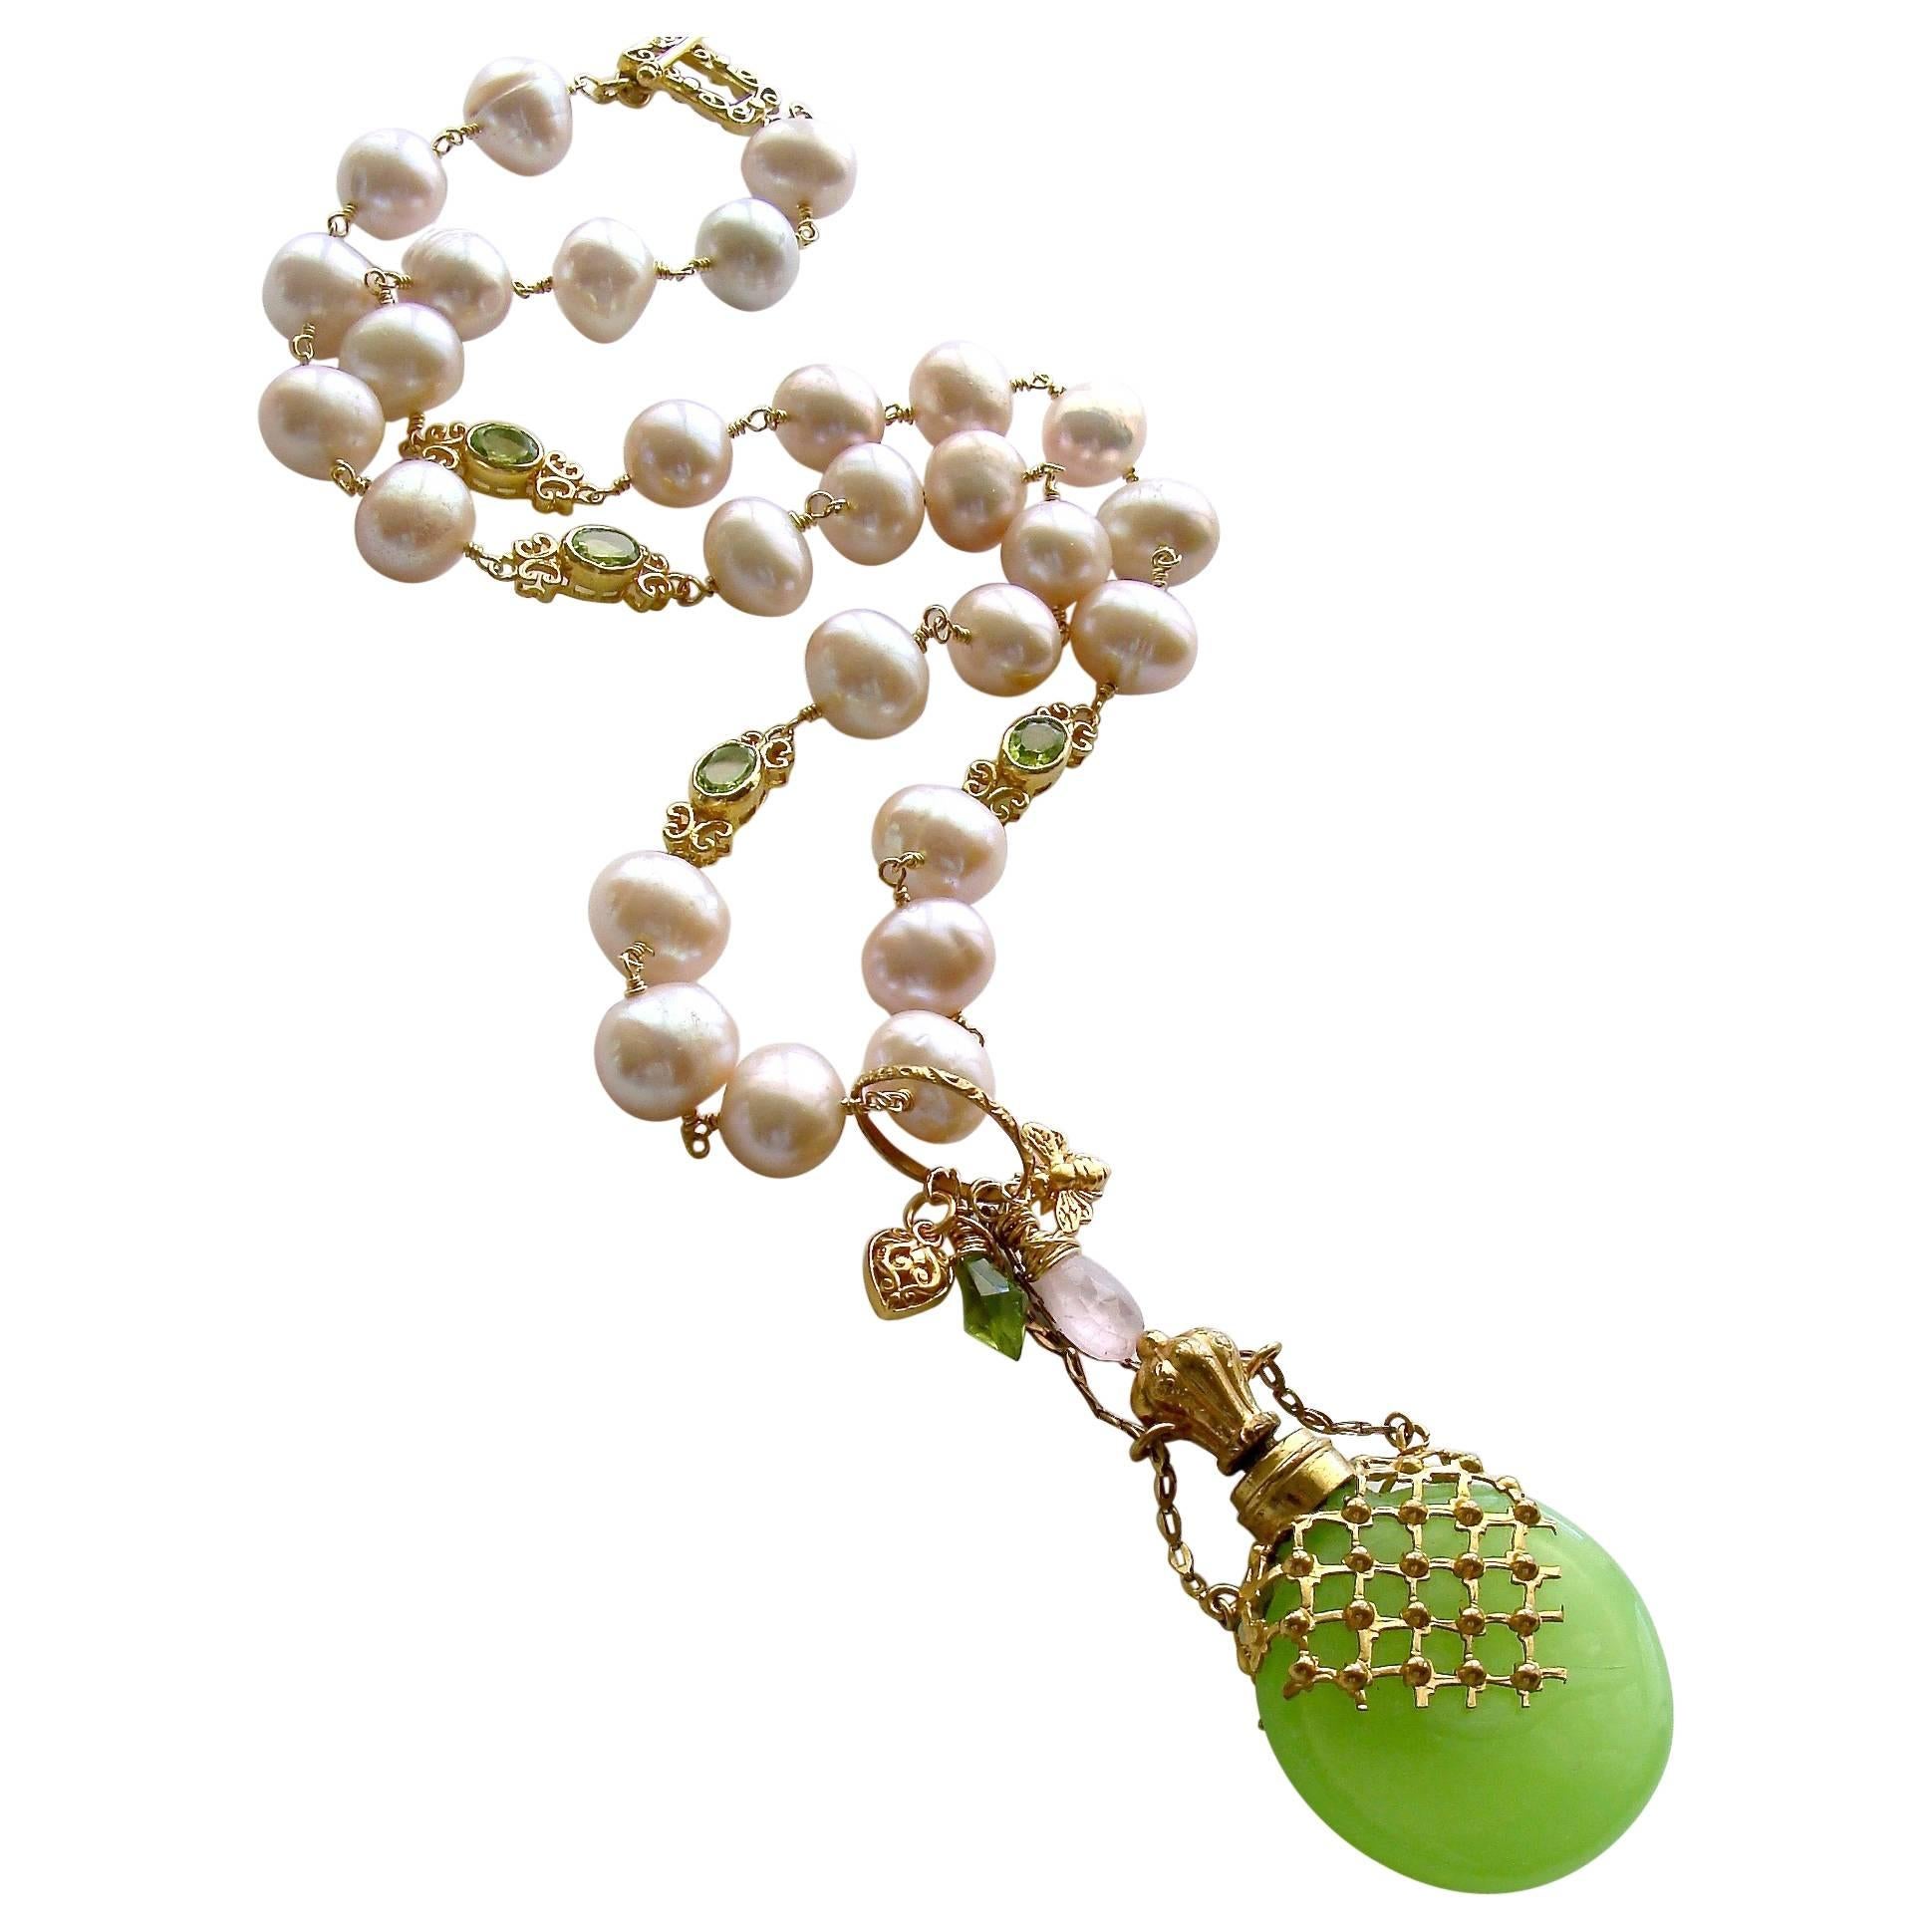 Kiwi Green Opaline Pink Baroque Pearls Peridot Chatelaine Scent Bottle Necklace 